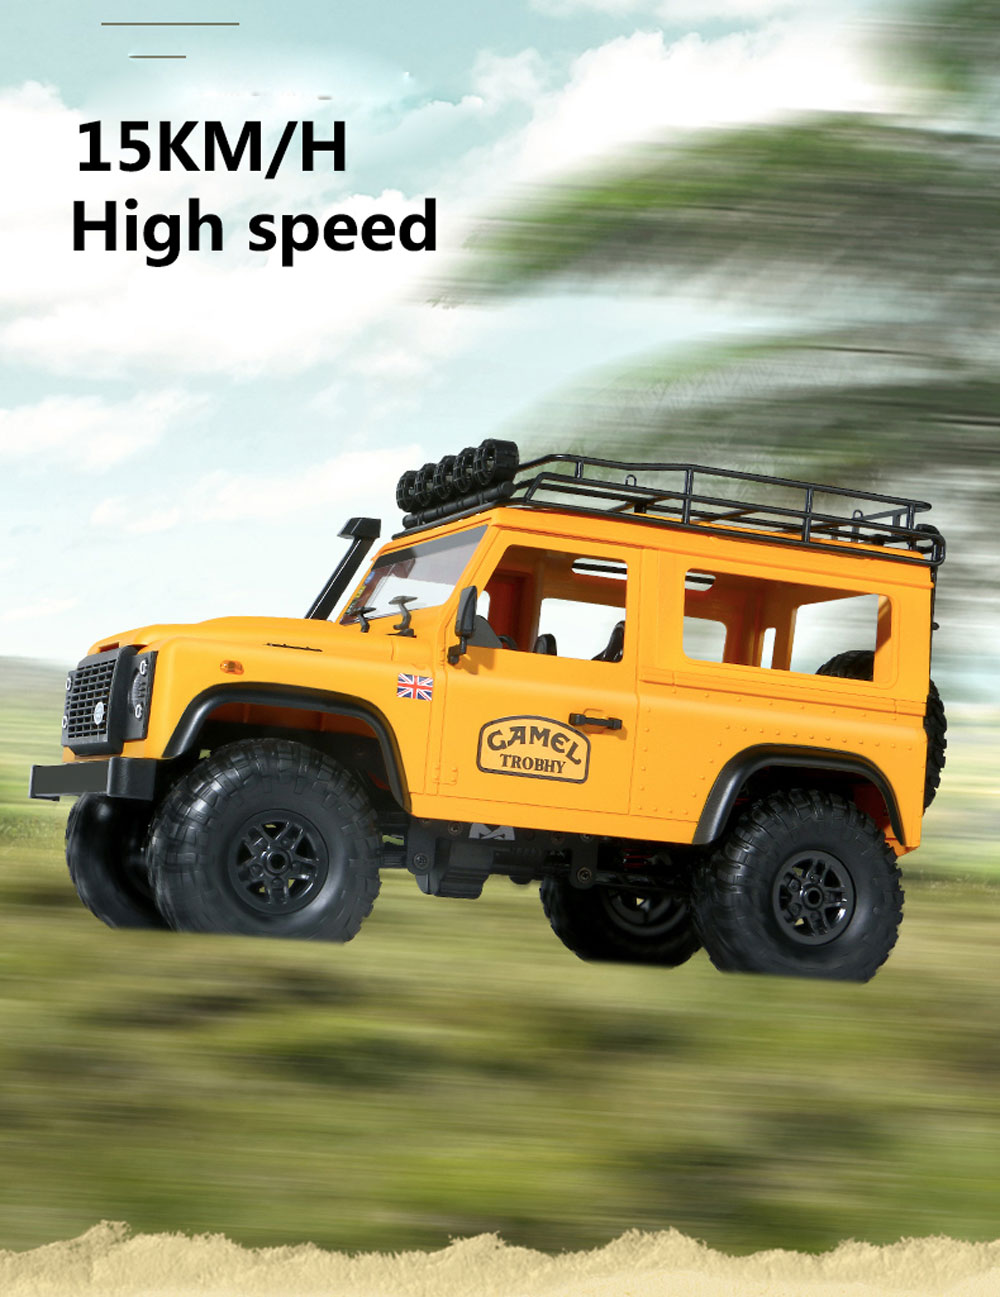 MN Model MN98 4WD Climbing Off-road Vehicle RC Car